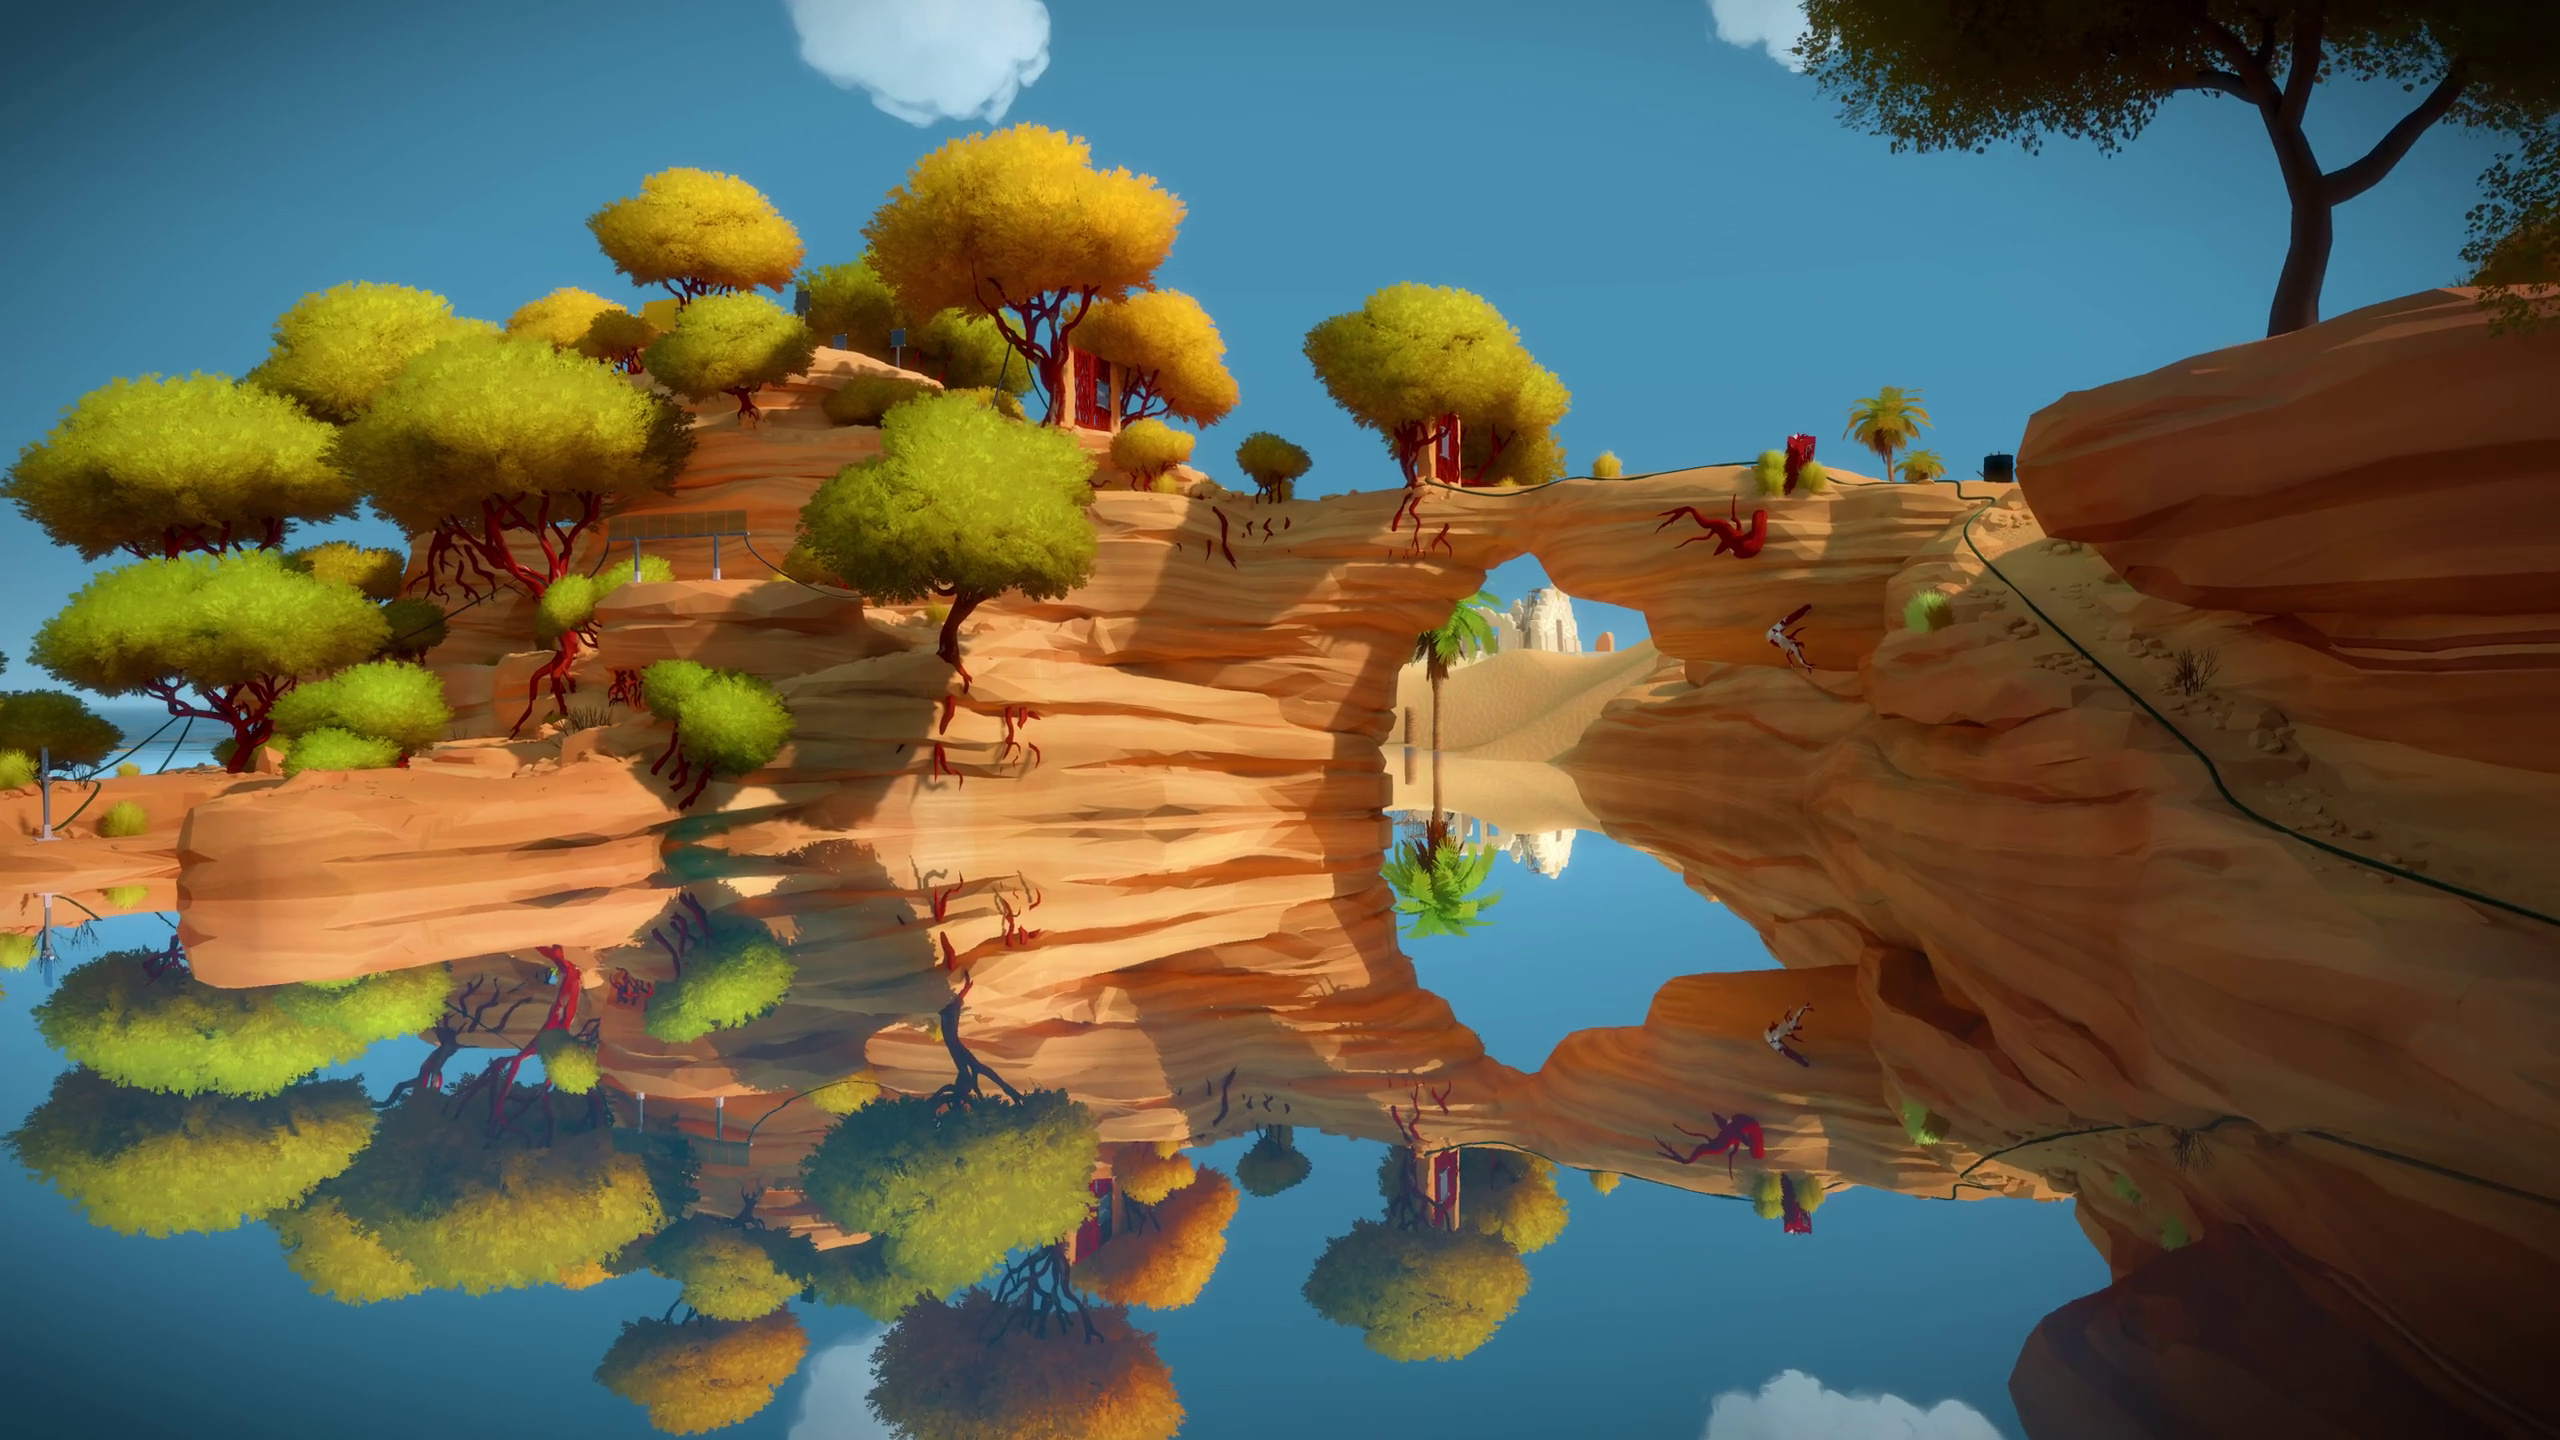 Puzzle game, The Witness wallpapers, Intricate puzzles, Gaming thrill, 2560x1440 HD Desktop